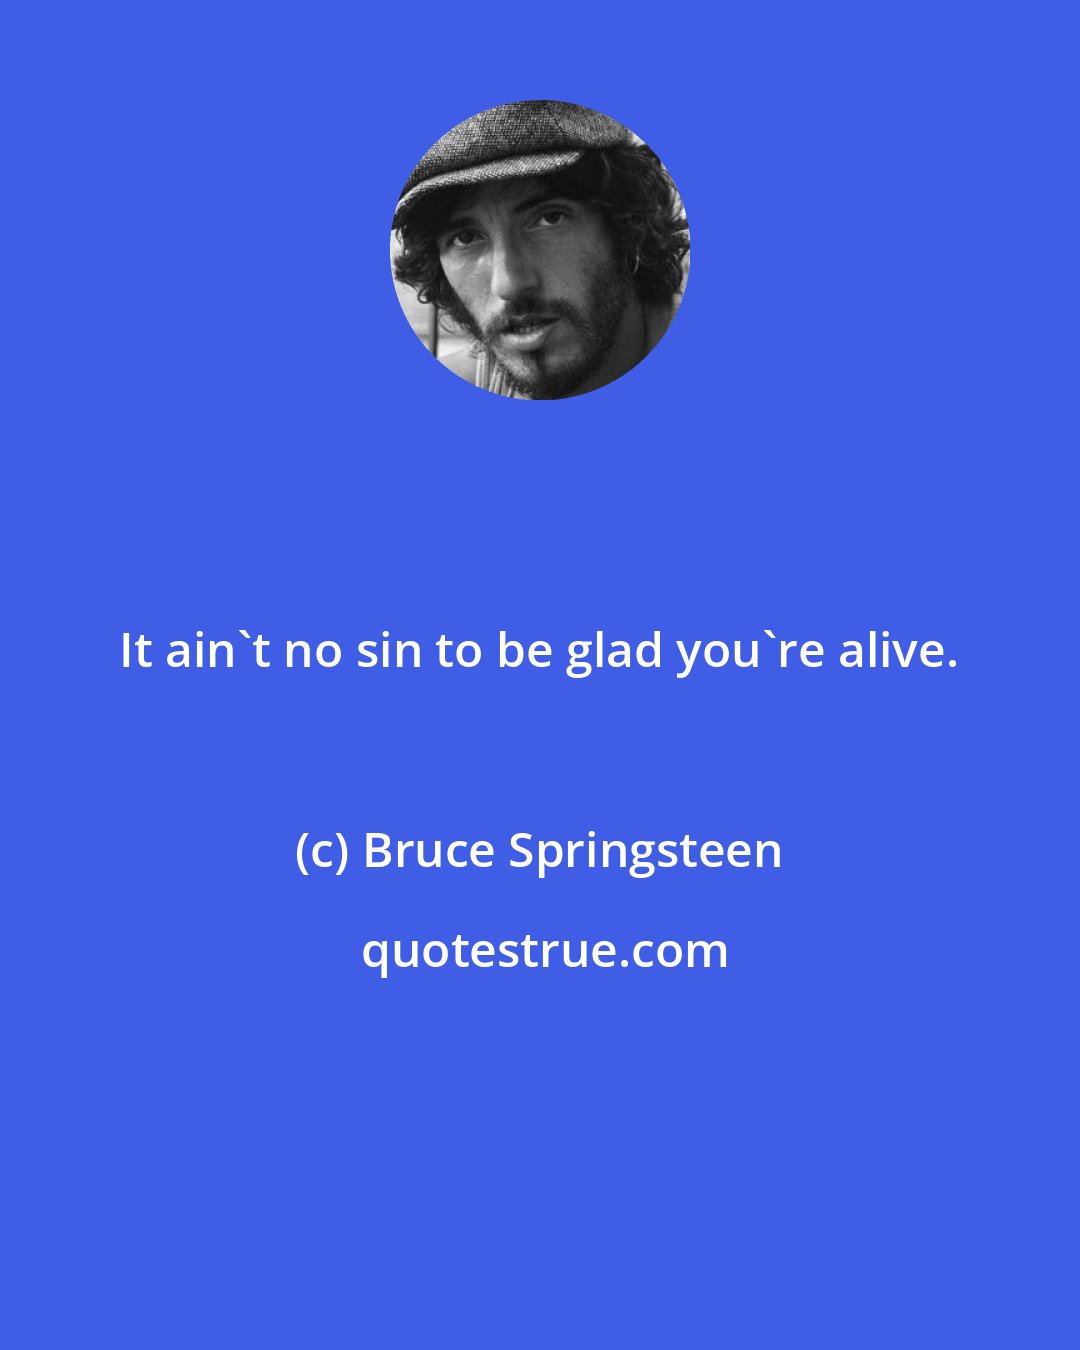 Bruce Springsteen: It ain't no sin to be glad you're alive.